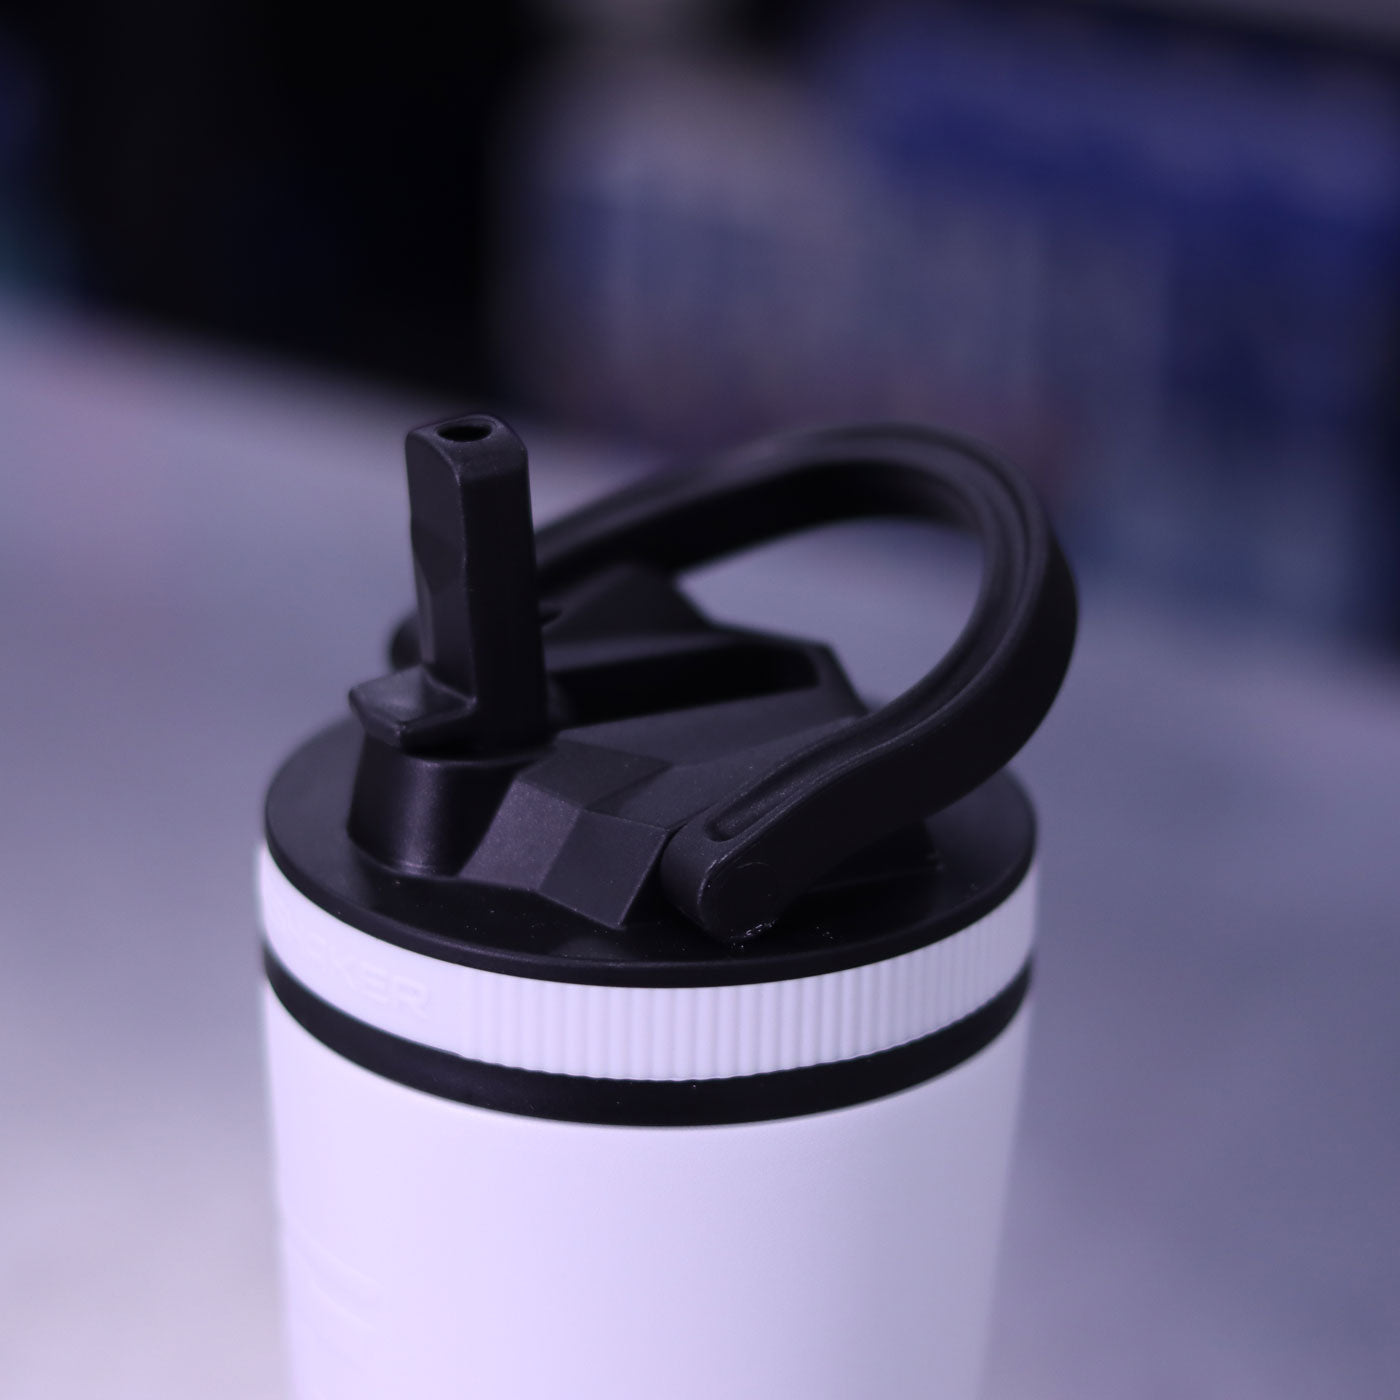 An image showing a close-up view of the Sport Bottle Lid with the Flip Up Sport Straw up and a carry handle on built into the lid.